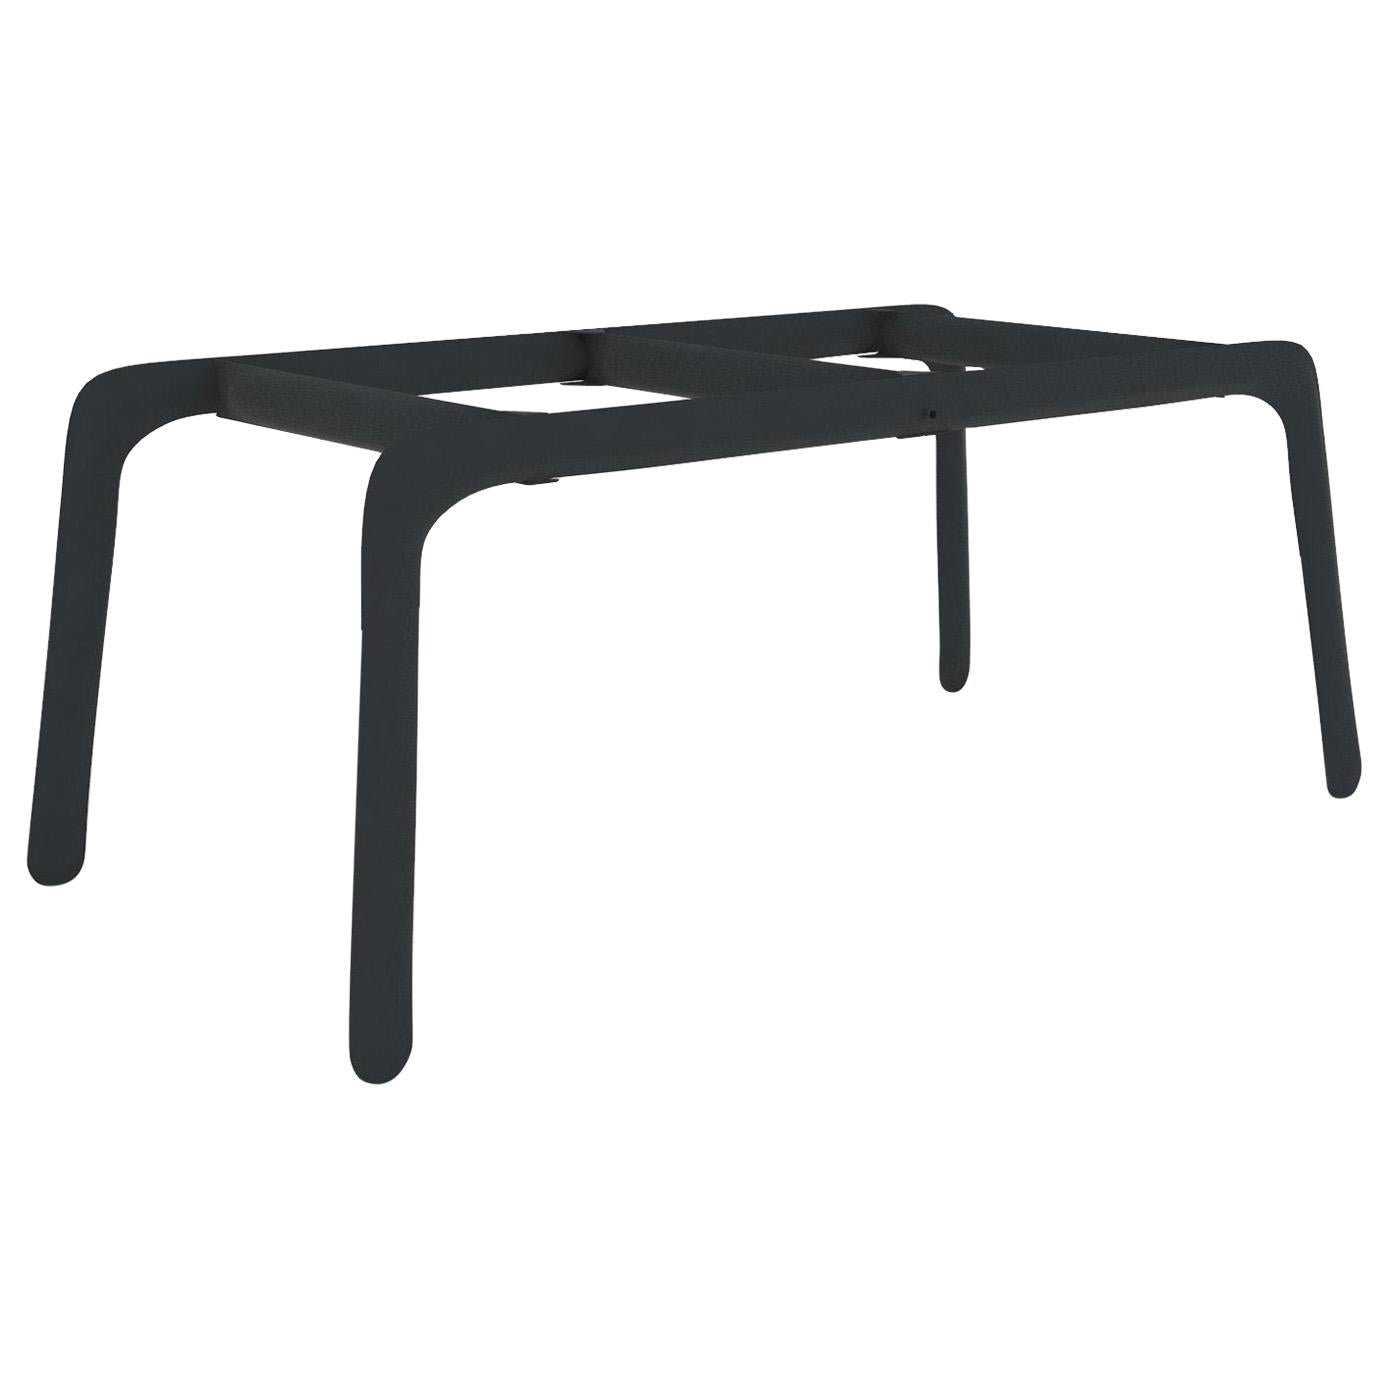 Most Polished Graphite Grey Color Carbon Steel Writing Table by Zieta